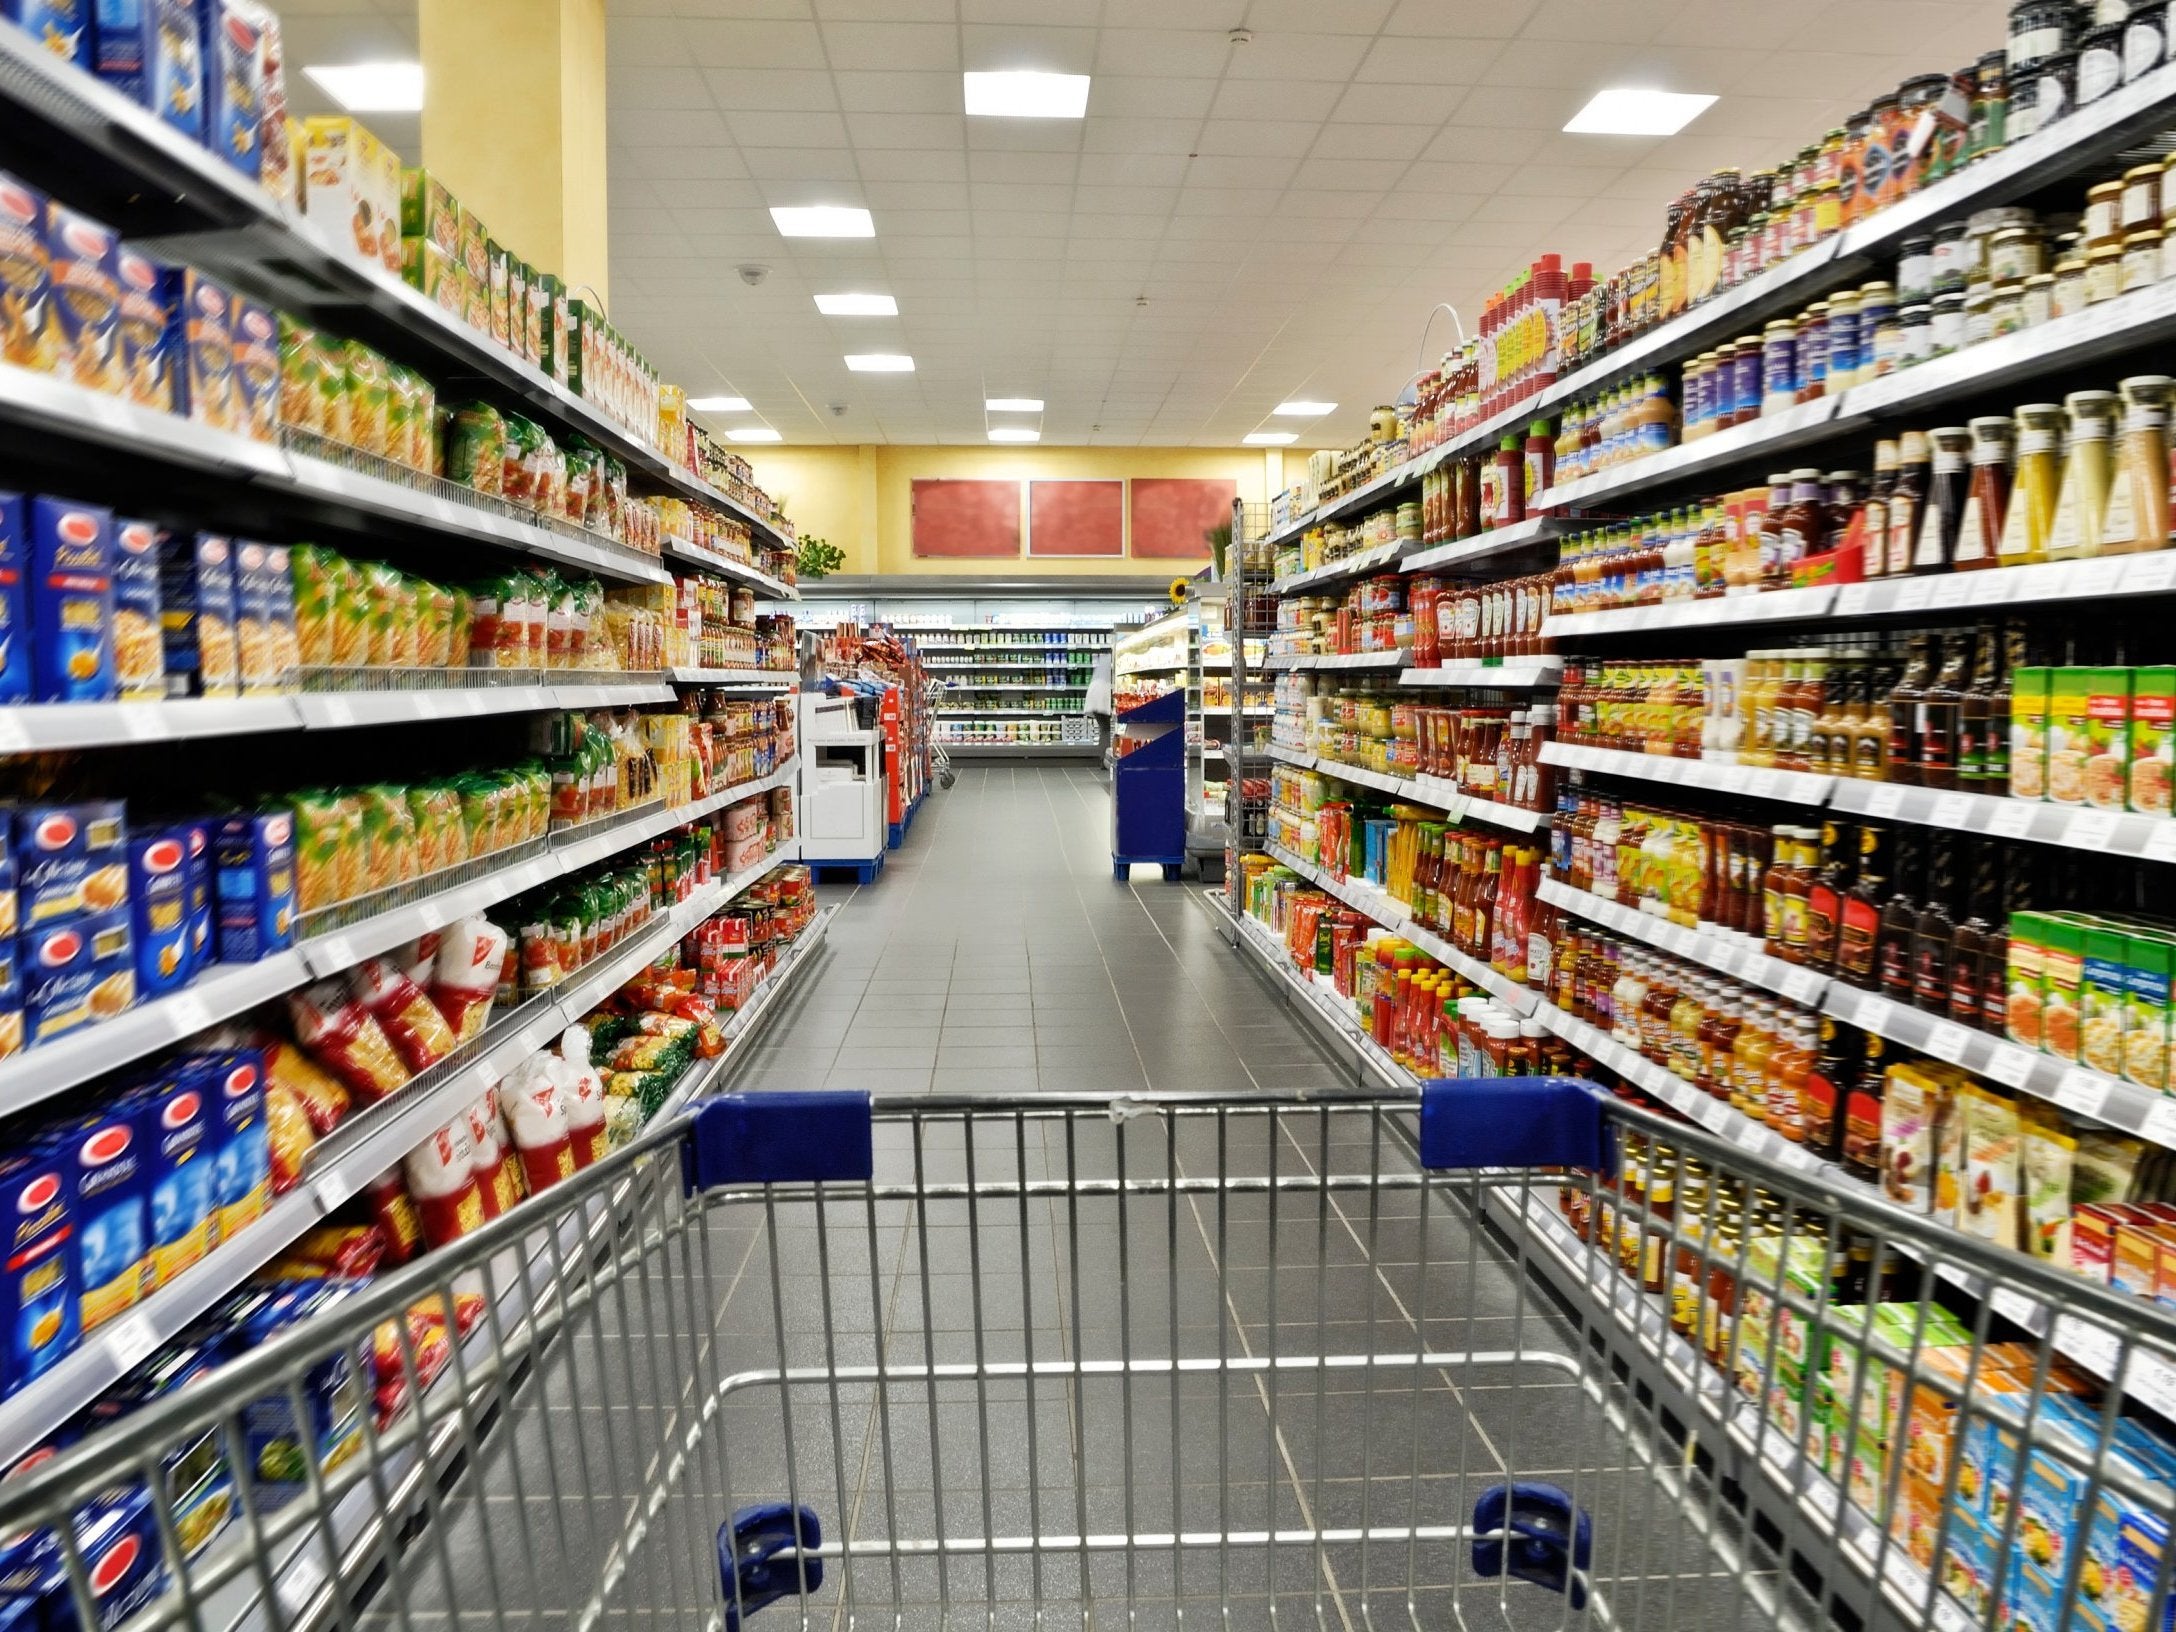 'The biggest single challenge will be in a no-deal scenario and what happens with fresh food.' says Tesco boss Dave Lewis